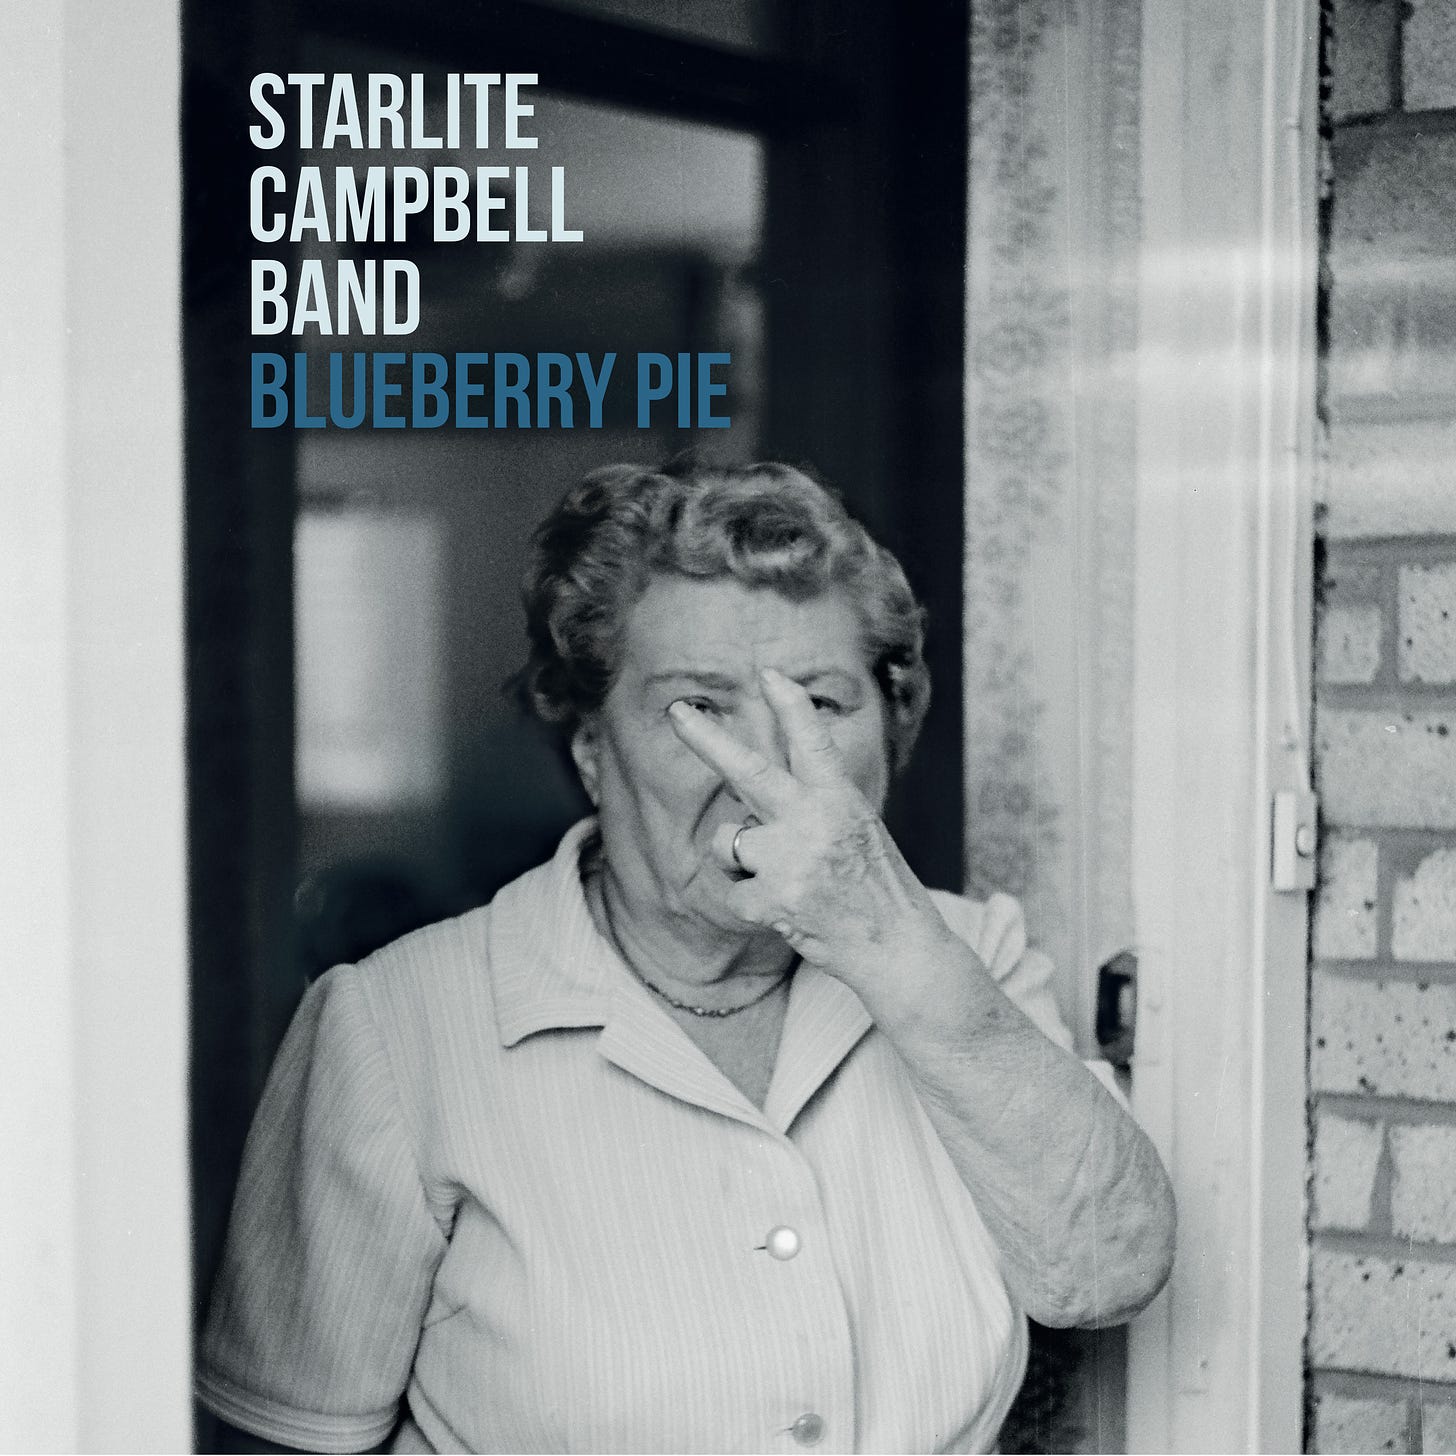 The album cover for Blueberry Pie by the Starlite Campbell Band featuring Starlite's grandma Betty Higgs flicking the Vs at the camera